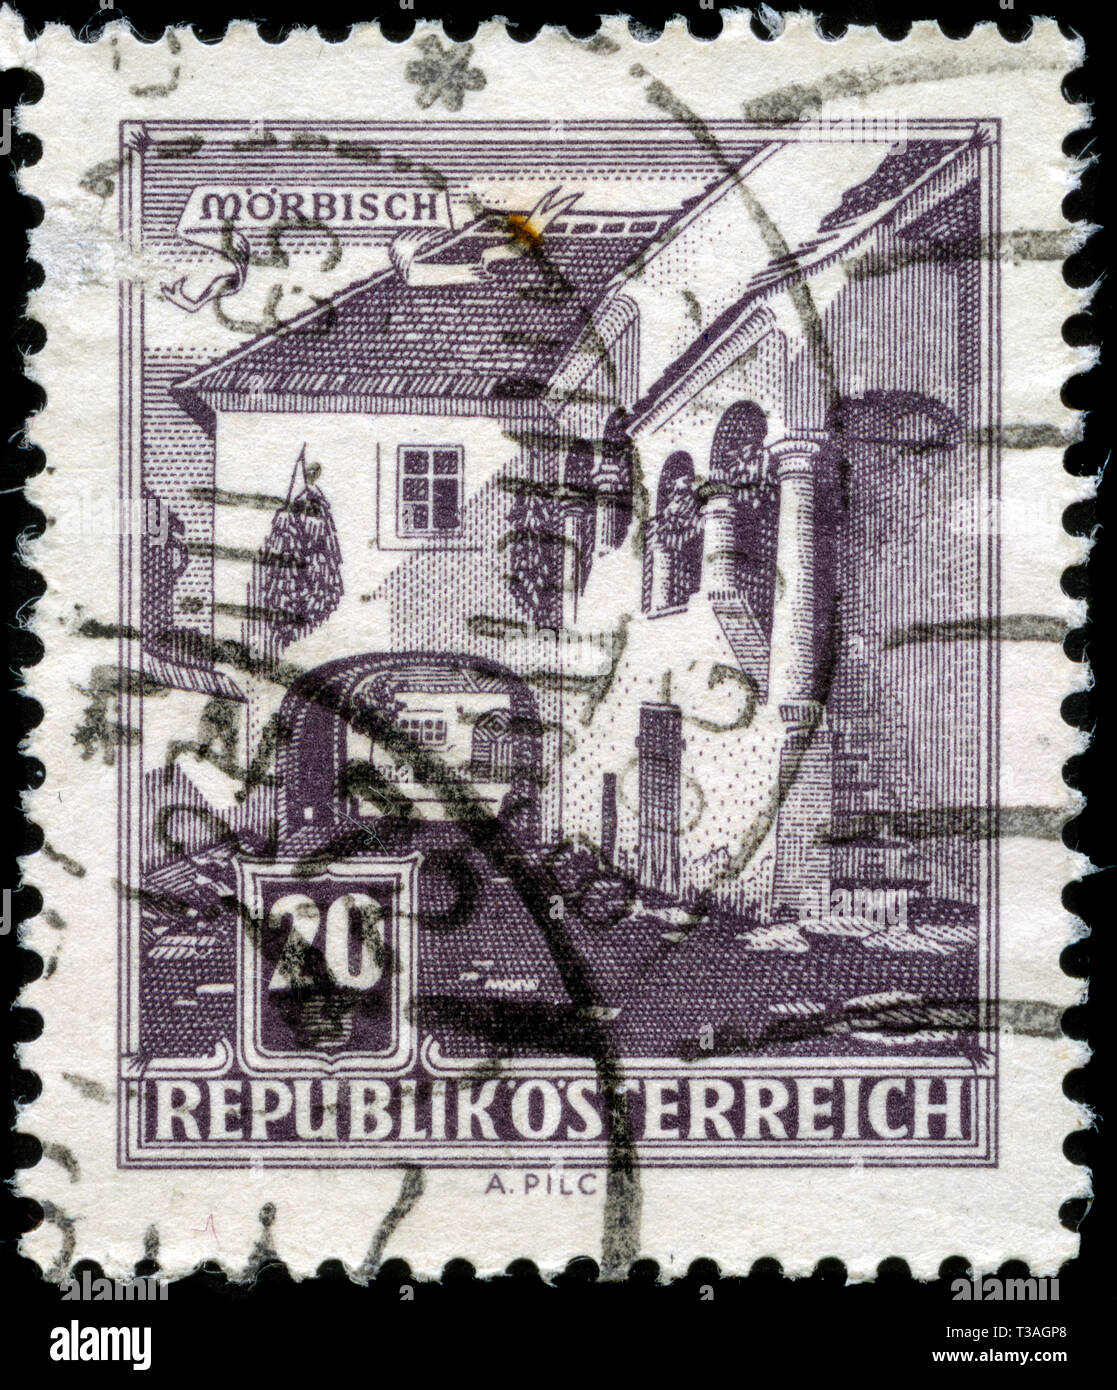 Postage stamp from Austria in the Buildings series issued in 1961 Stock Photo